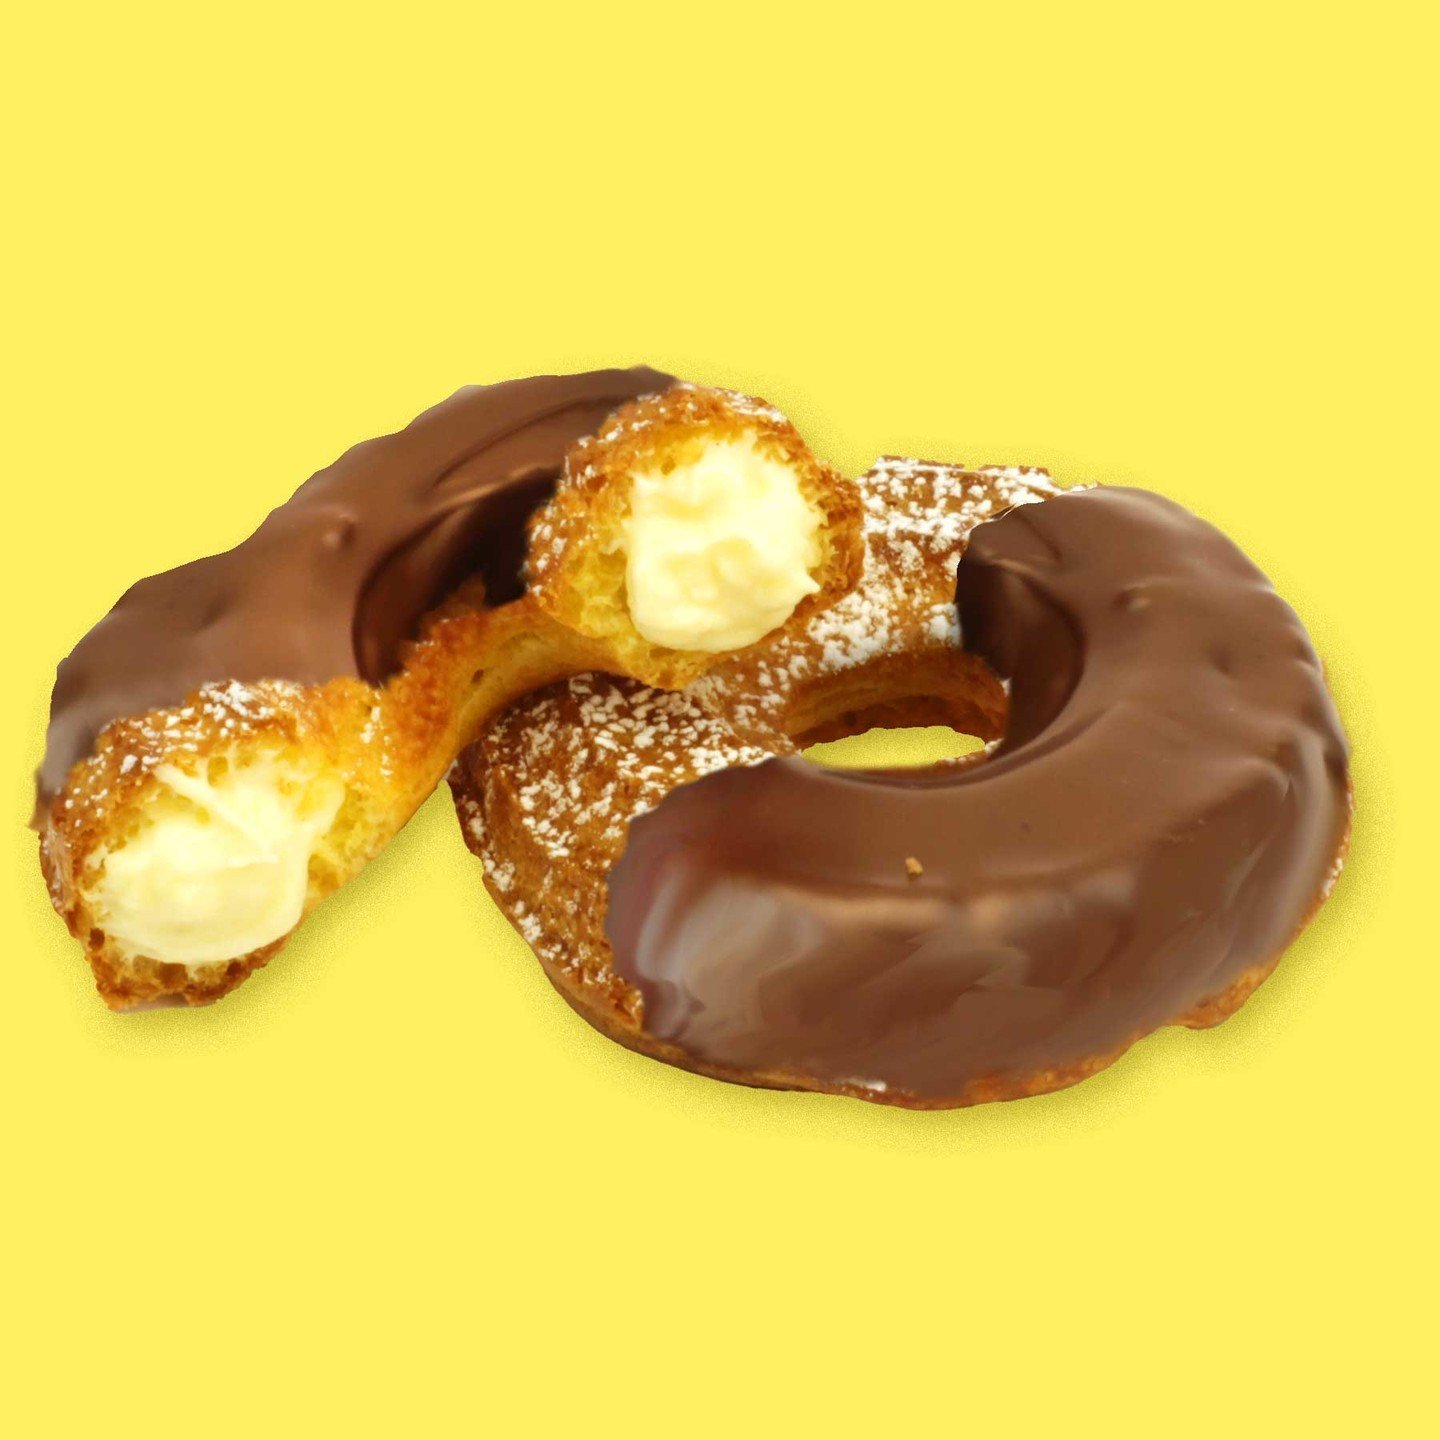 What is it and how can I get one? 🤩  See your local store for a delicious custard-filled Paris Brest pastry. Now at a lower price! Get a 6pk today!

😍 10% off web/app orders with code:  FLOWERS
beardpapas.com/order-online

#beardpapas #chocolate #l